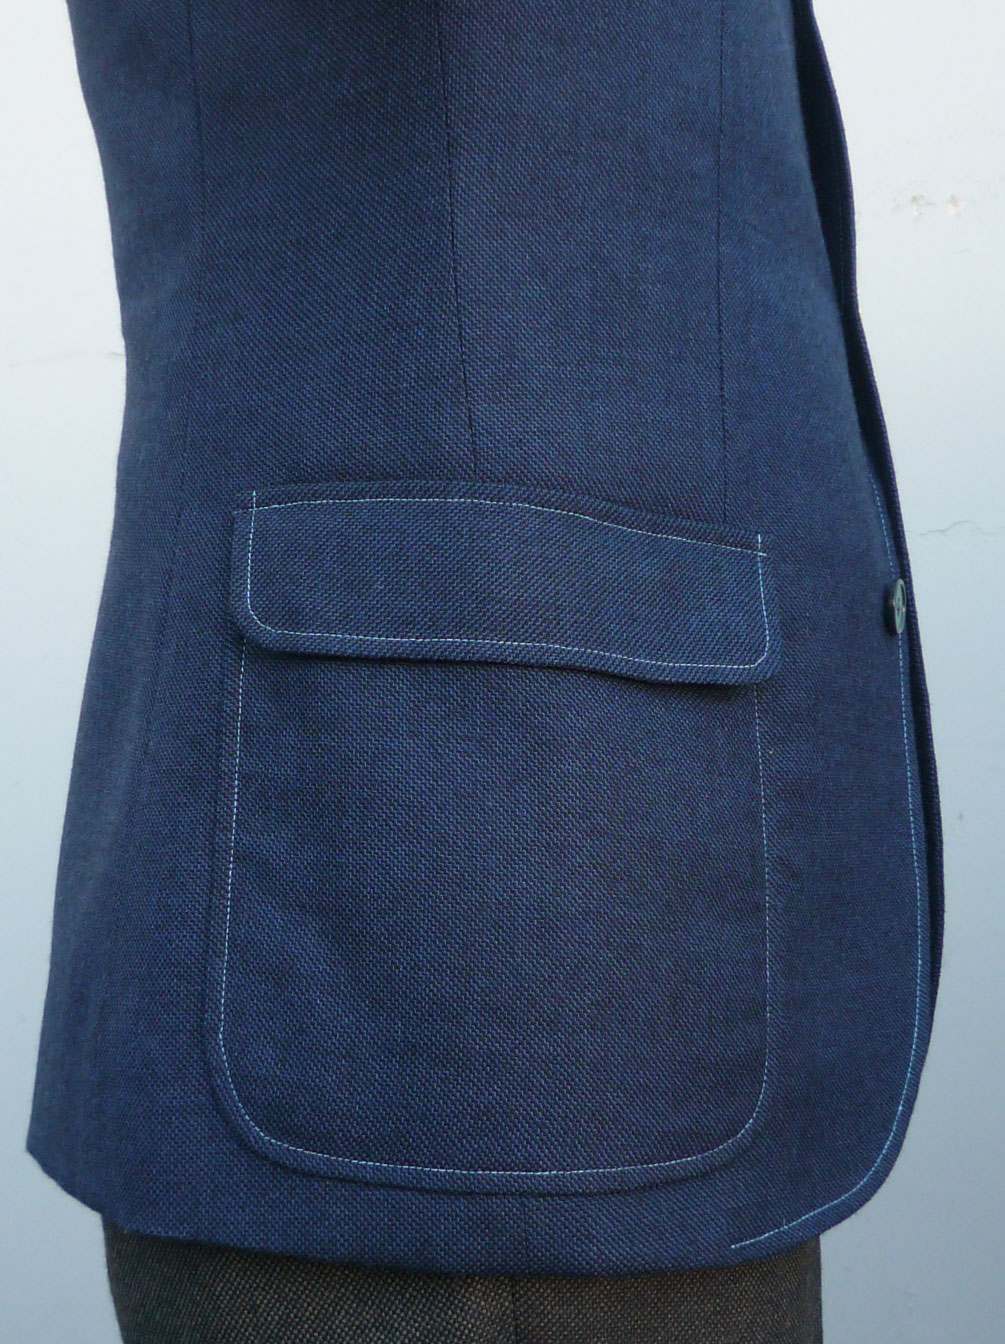 Patch Pockets With Flap